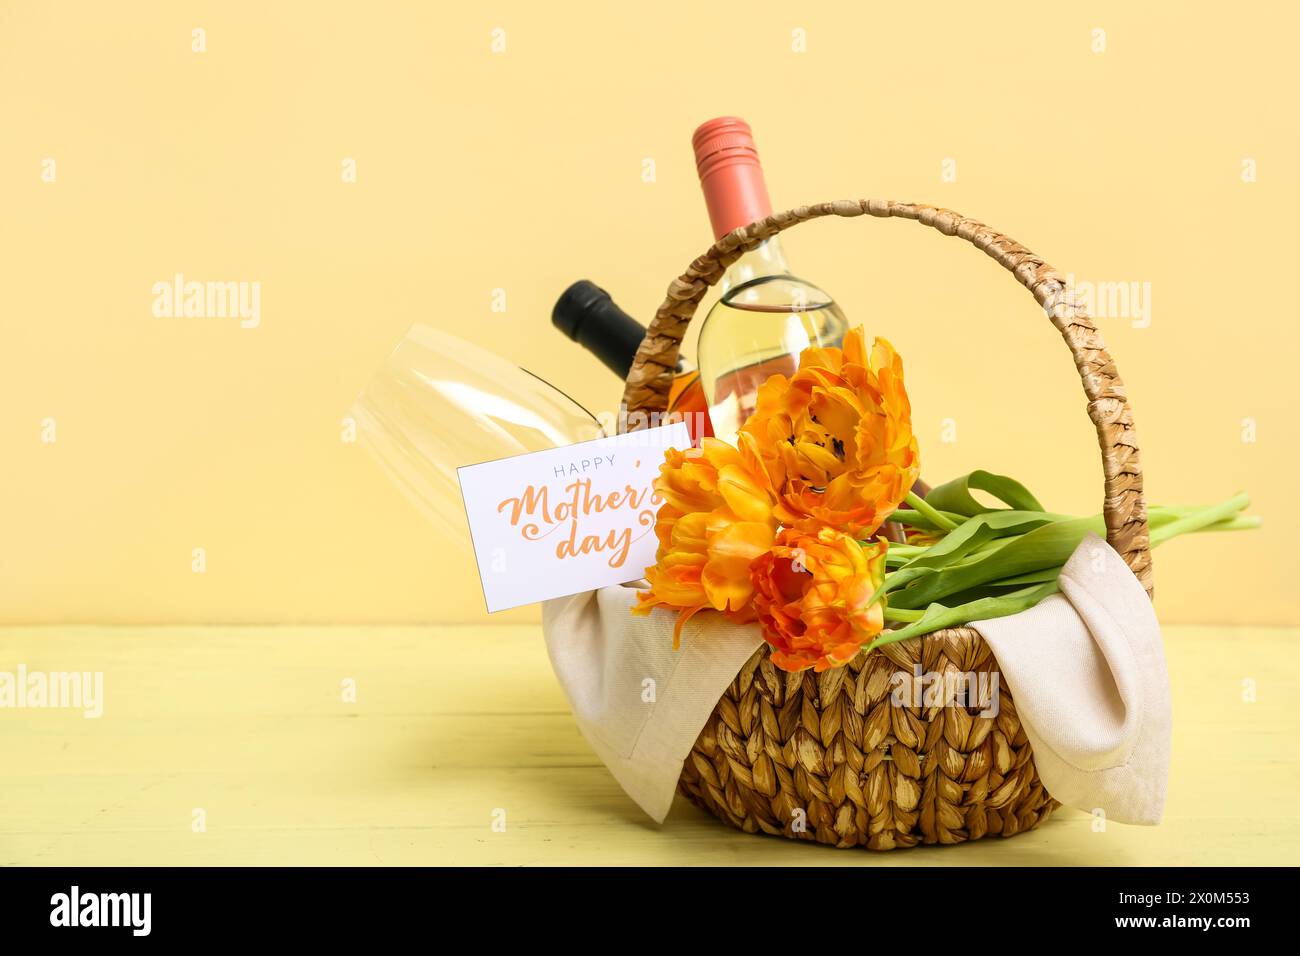 Basket with bottles of wine, glass and tulip flowers for Mother's Day celebration on color wooden table Stock Photo